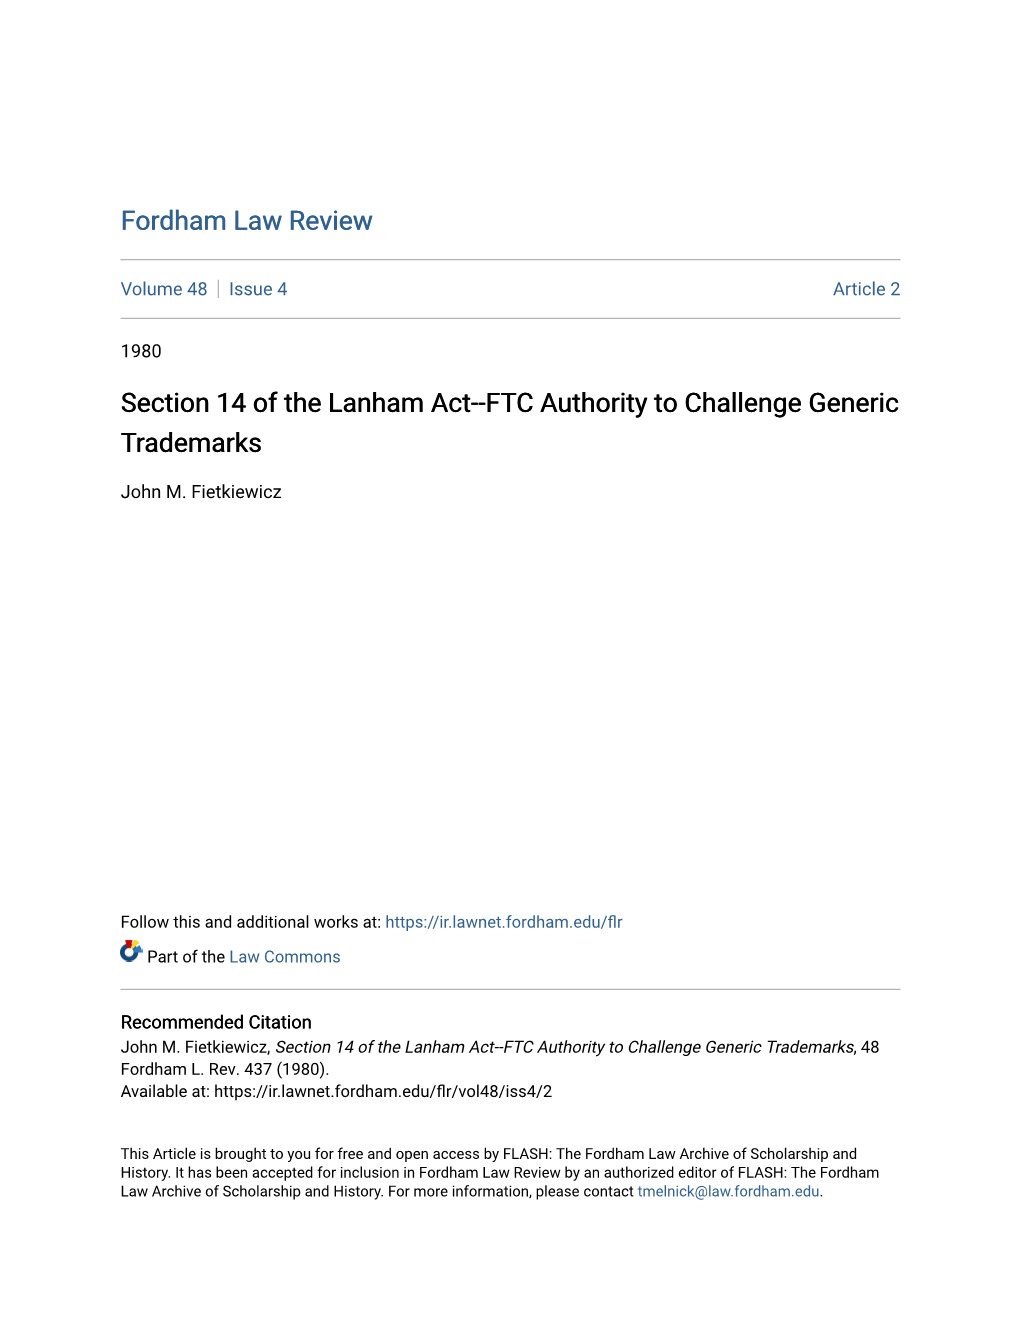 Section 14 of the Lanham Act--FTC Authority to Challenge Generic Trademarks